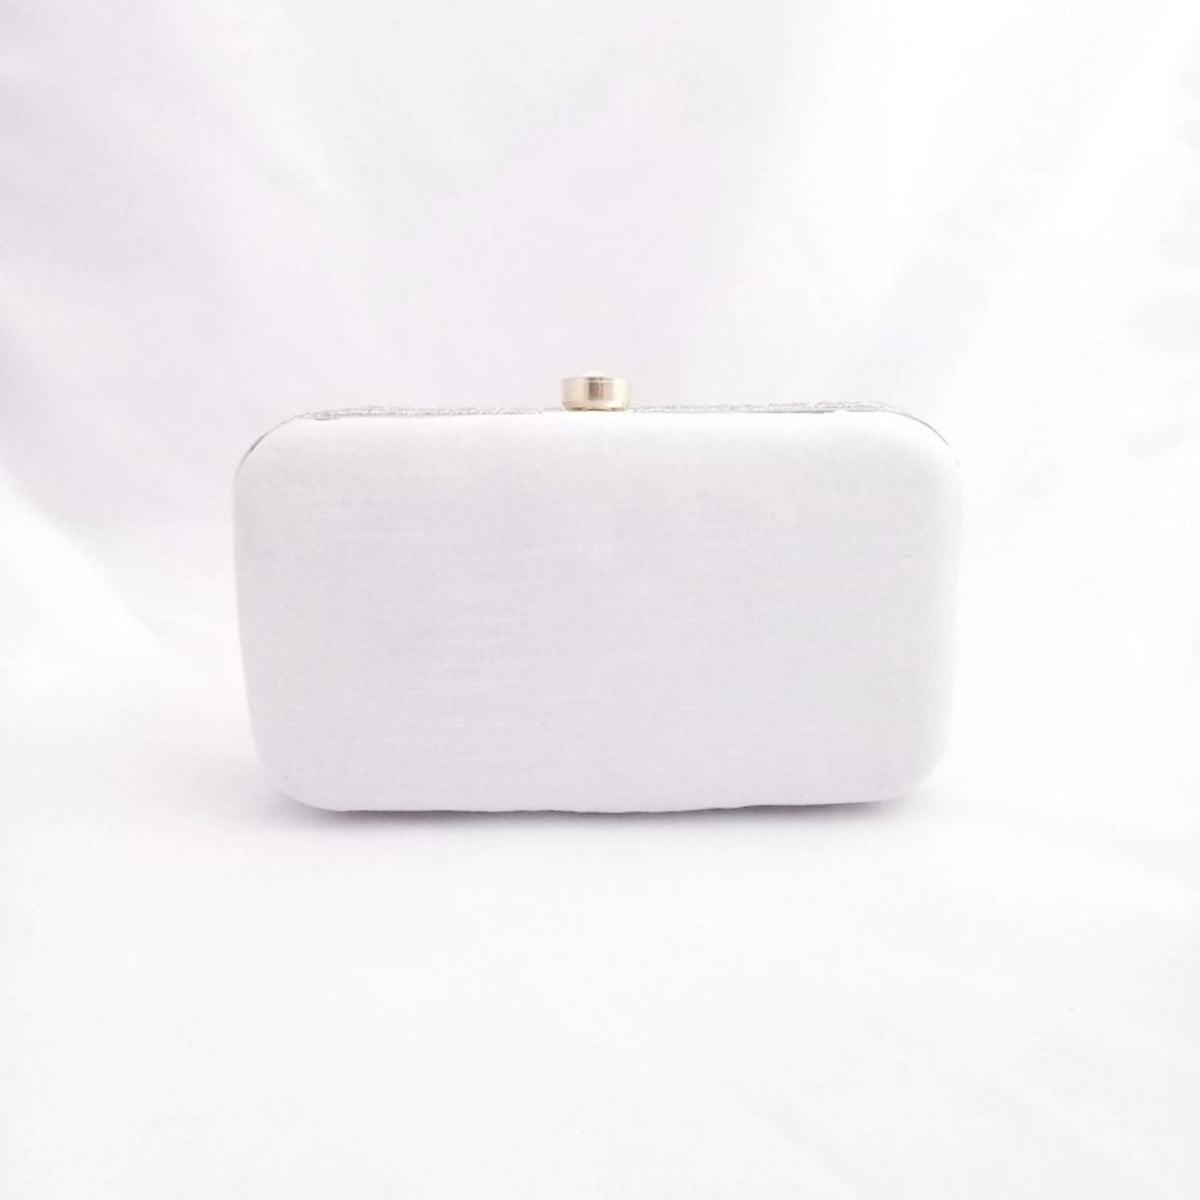 Silver cleopatra handembroidered clutch